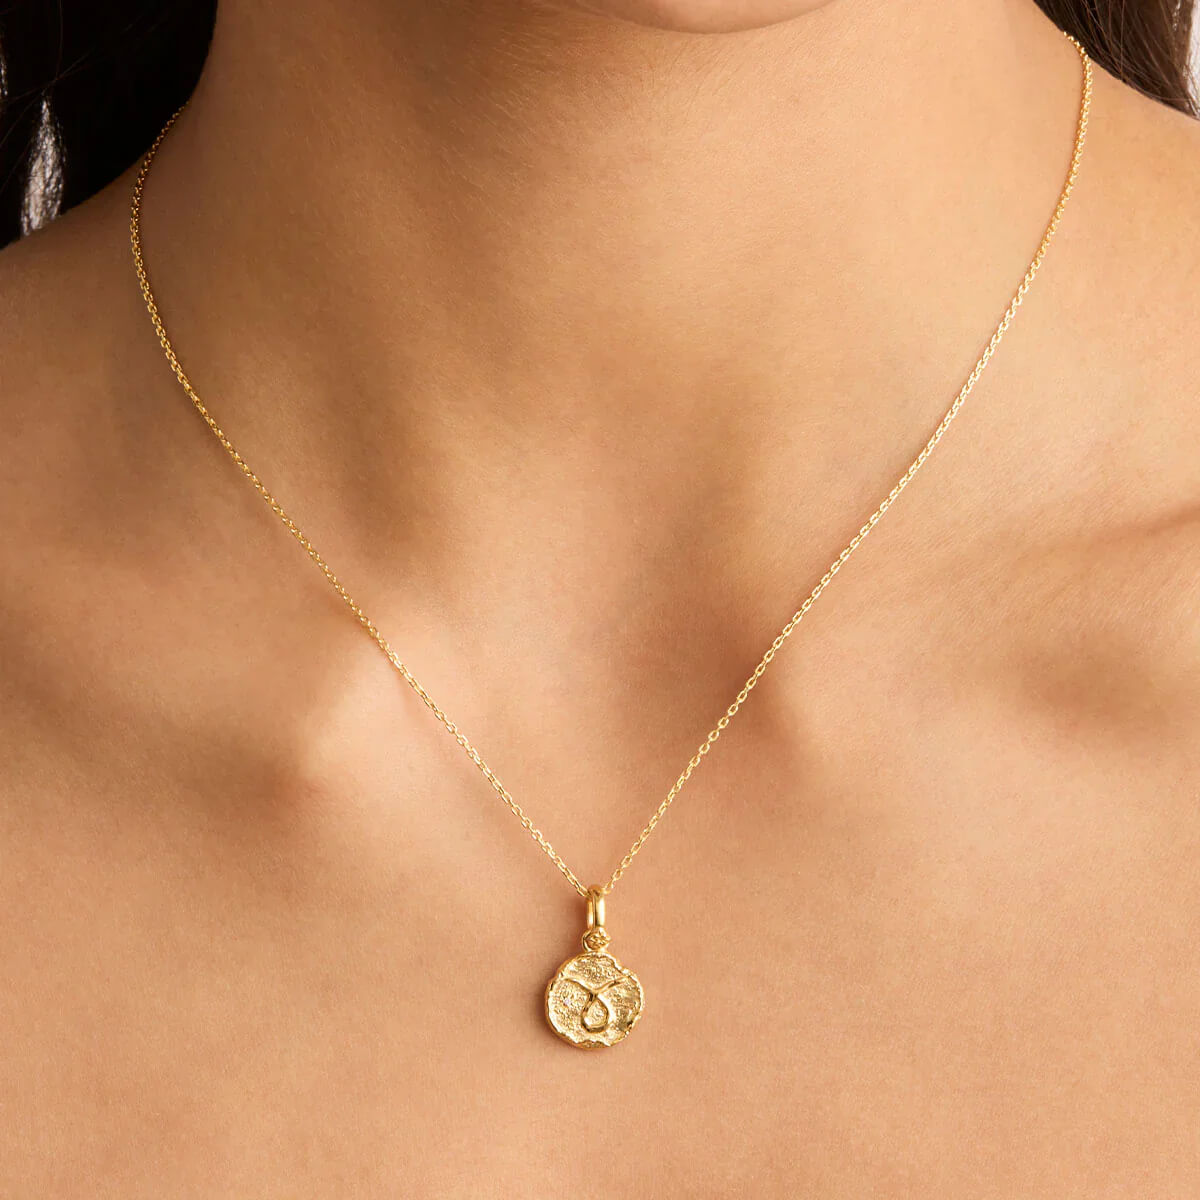 Dainty-Astrology-Coin-Necklace-Taurus-3